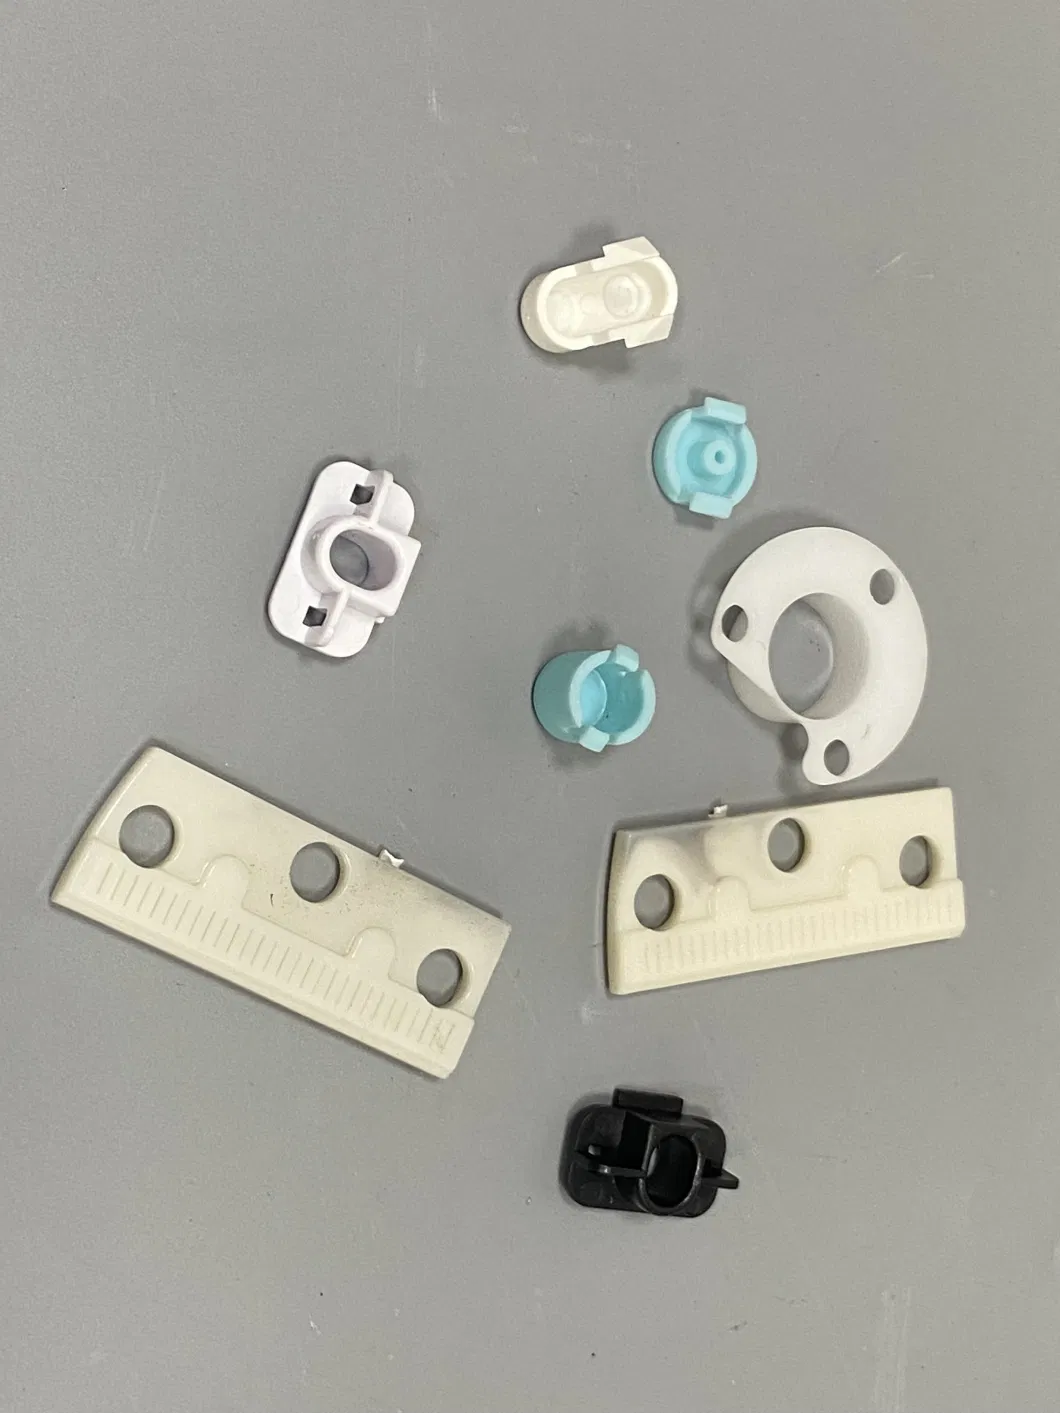 Manufacture Transparent Material Injection Product Polycarbonate ABS PP Injection Plastic Parts Molding